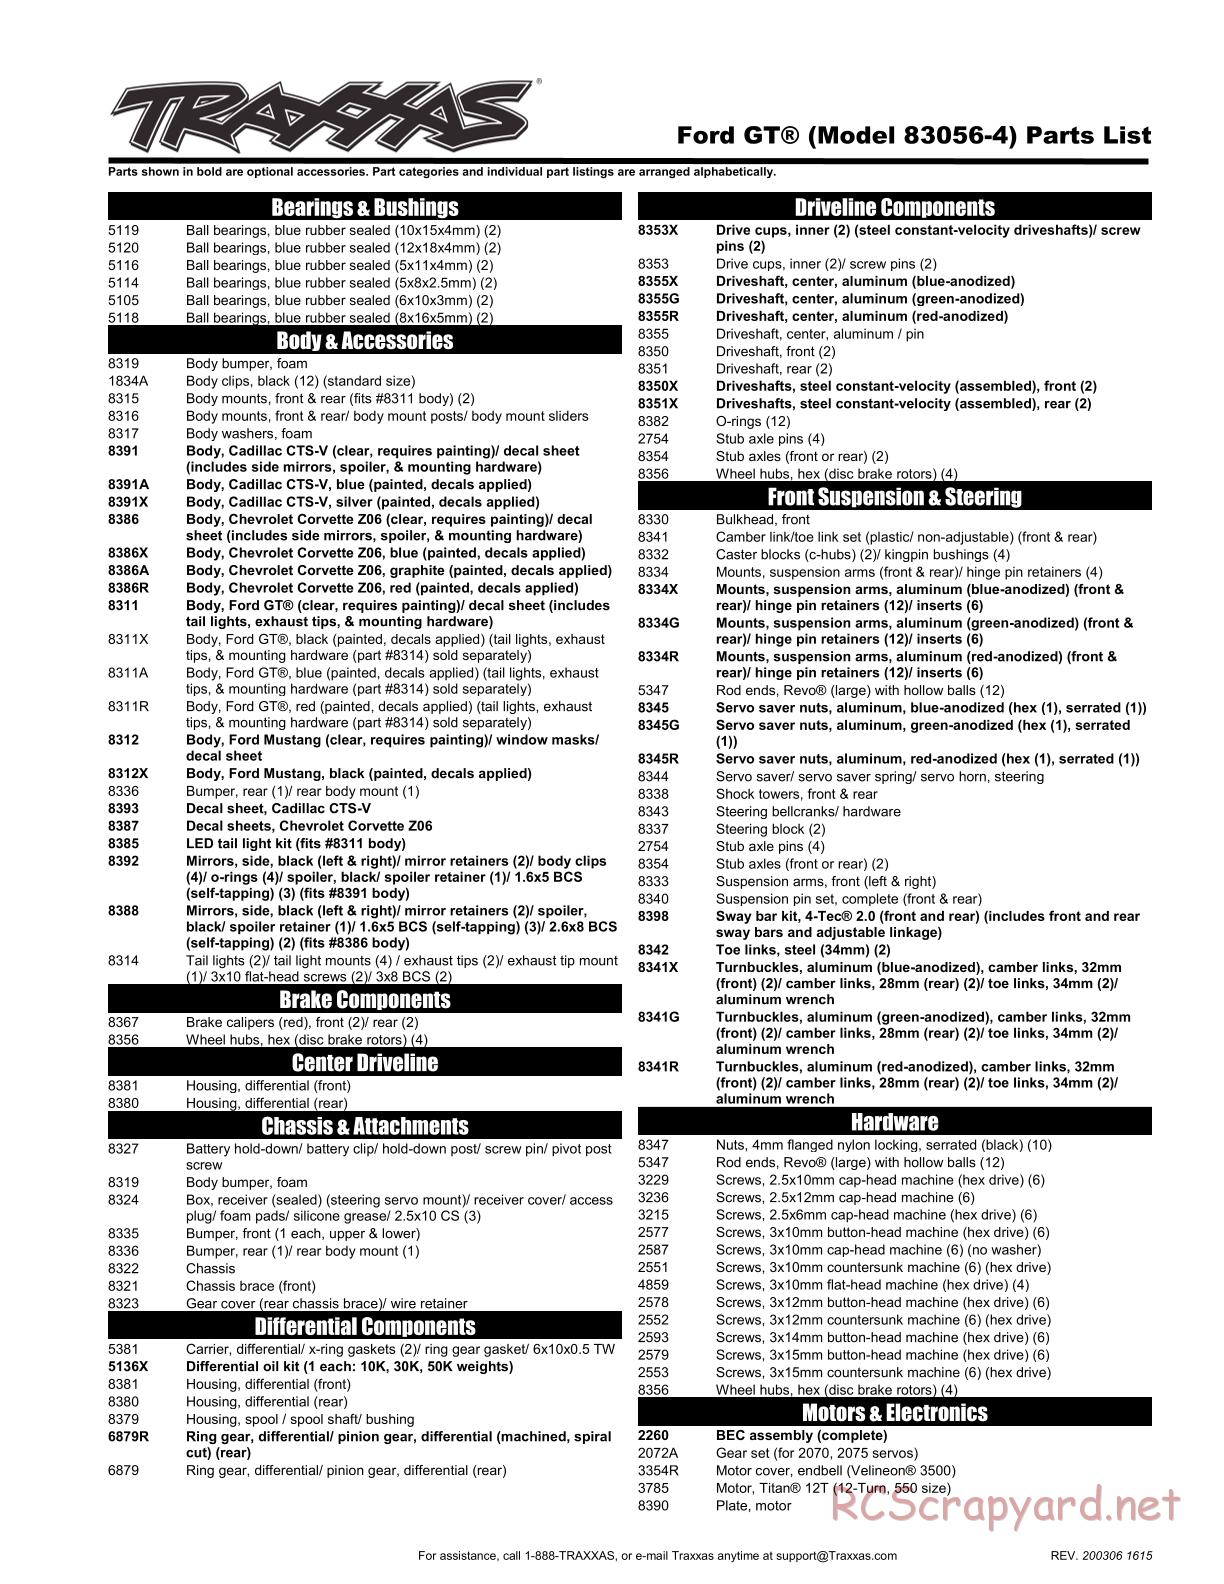 Traxxas - Ford GT - Parts List - Page 1